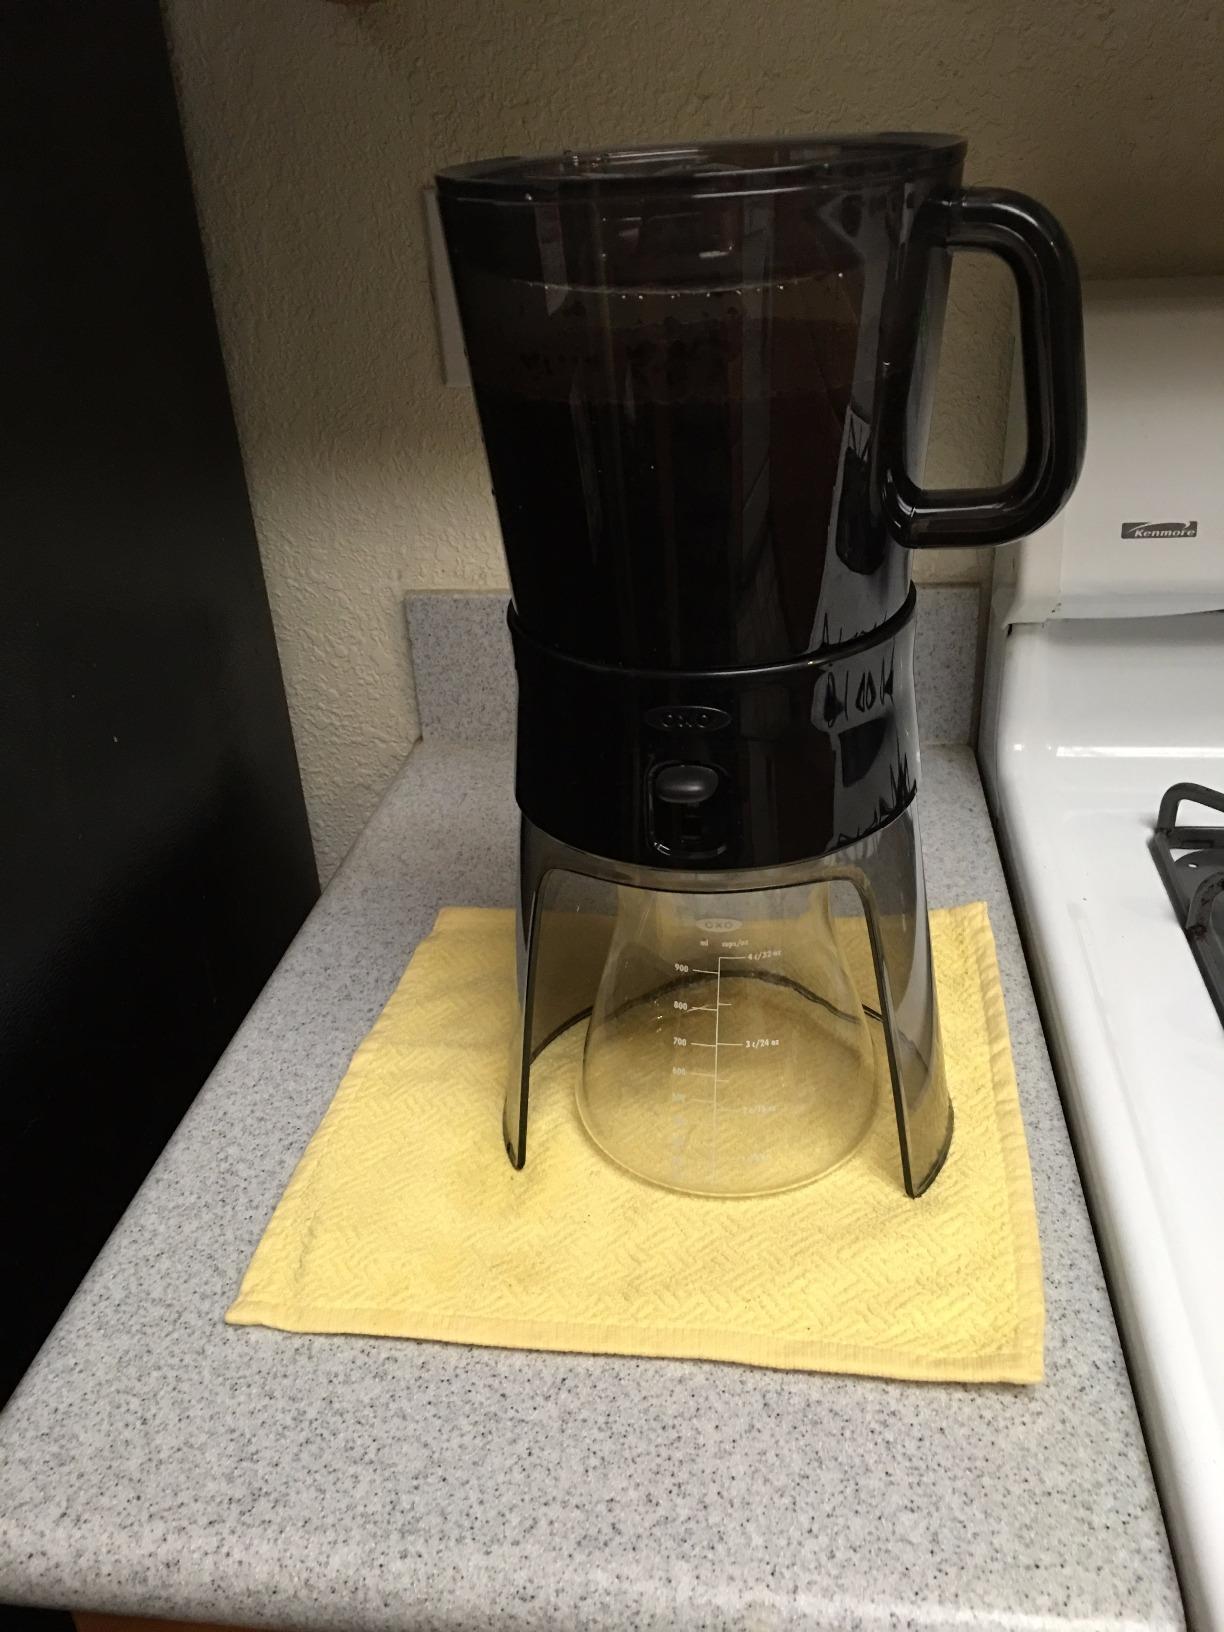 I am in LOVE with cold brewed coffee! Great machine!